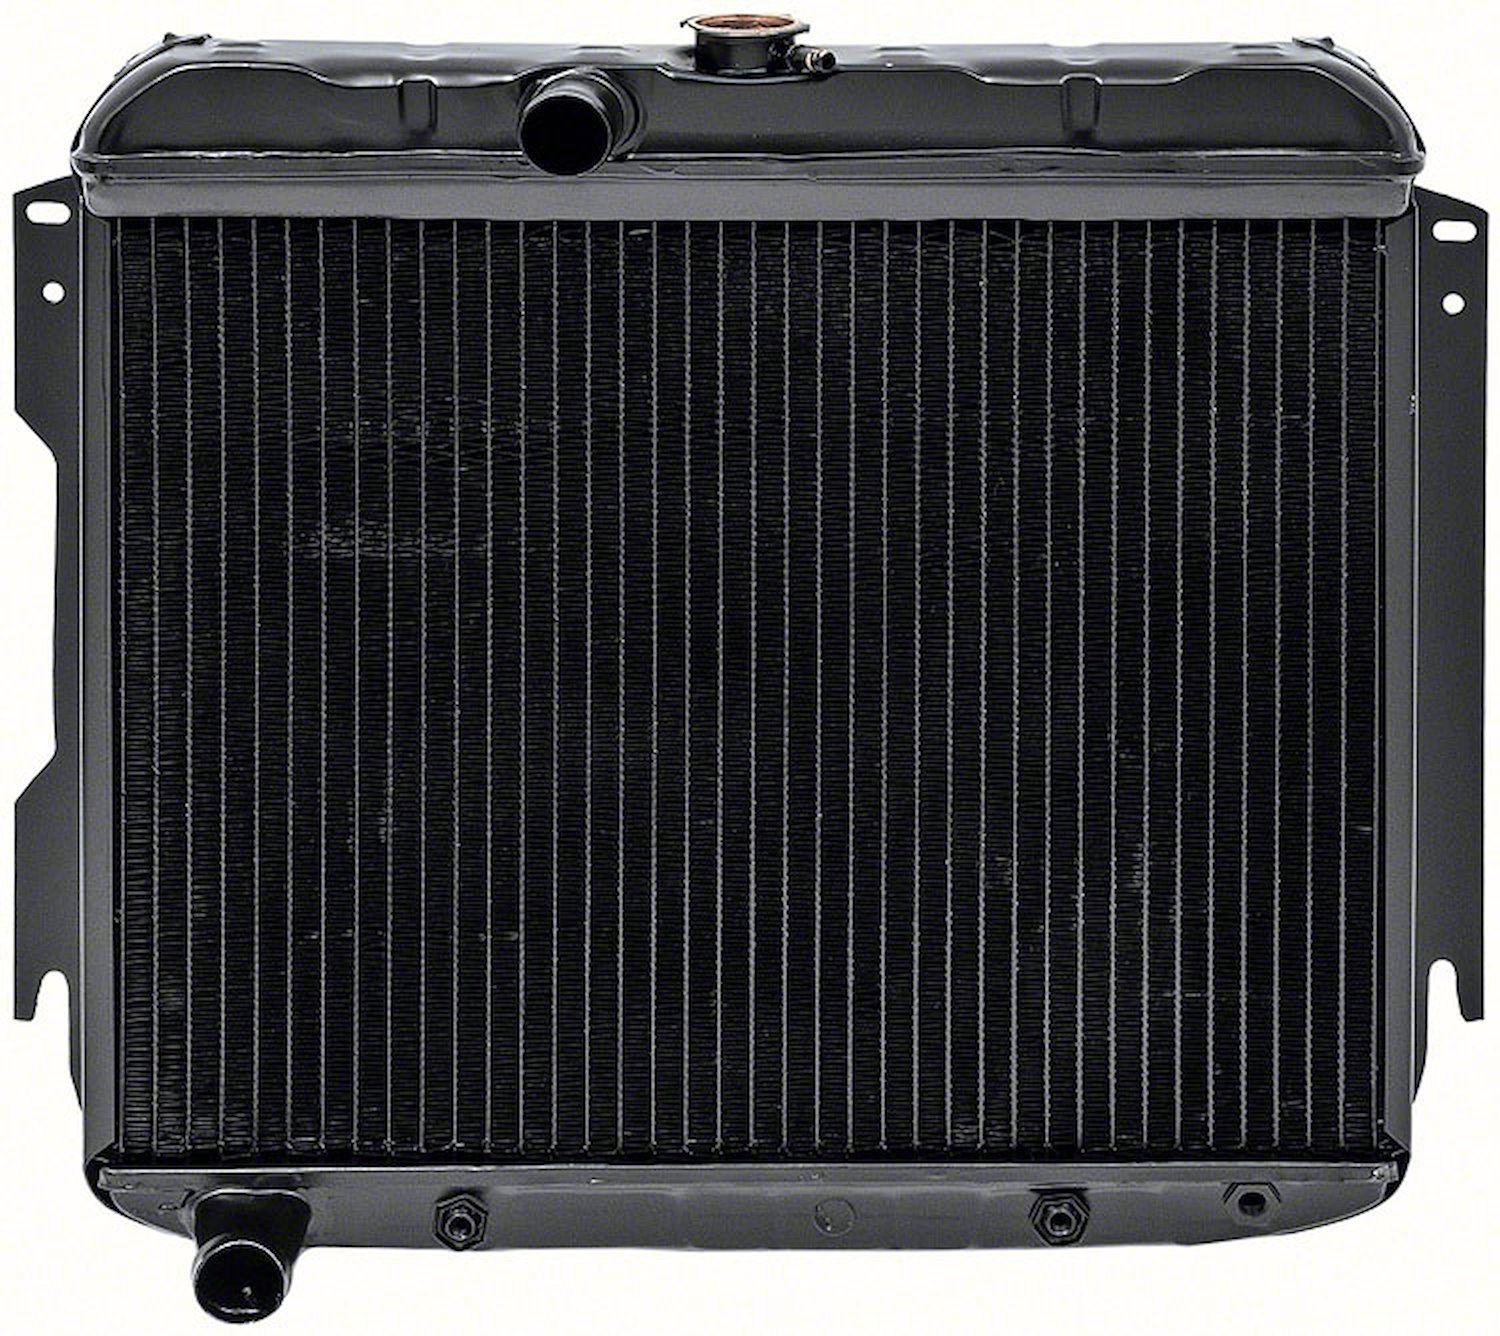 MB2364A Replacement Radiator 1963-64 Dodge B-Body V8 361/383/426 With Automatic Trans 3 Row